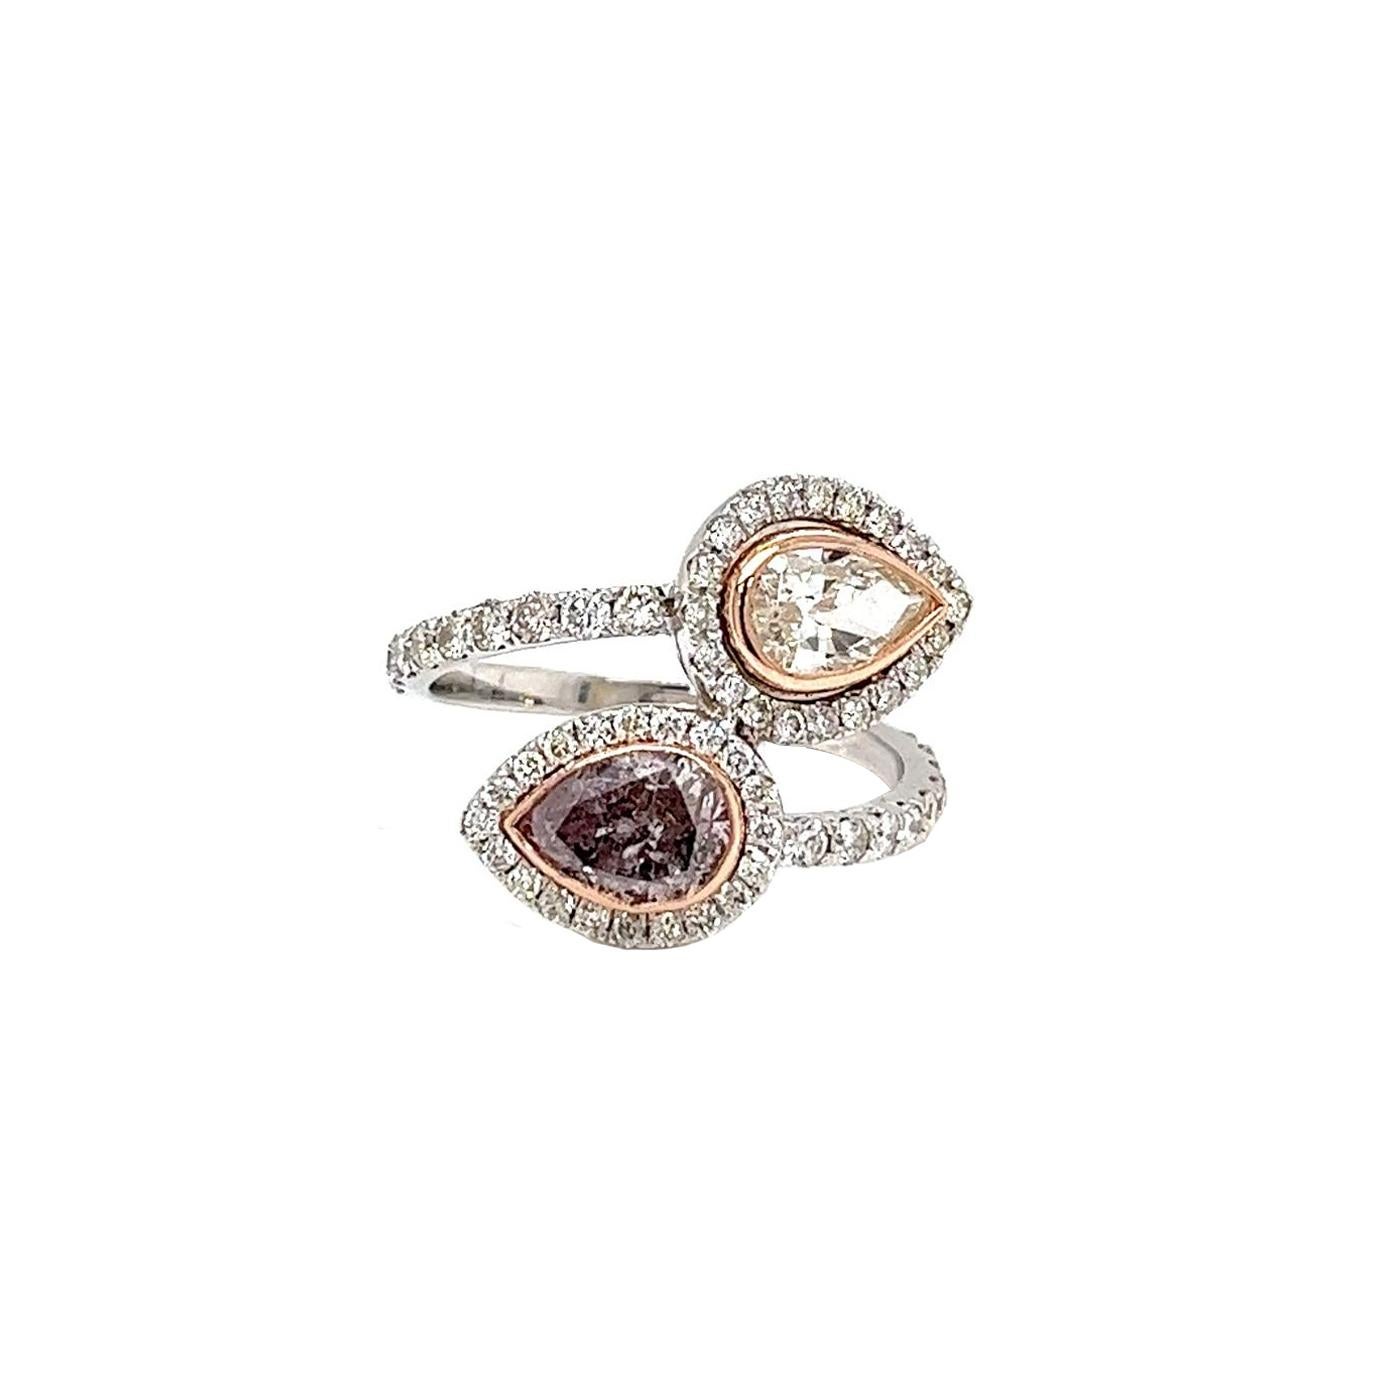 Experience the epitome of elegance with this Natural Fancy Purplish Pink Diamond Ring. Gracing the center stage are two enchanting Pear-shaped Diamonds, combining for a total carat weight of 1.01, and featuring a clarity of I1, and SI1 that enhances